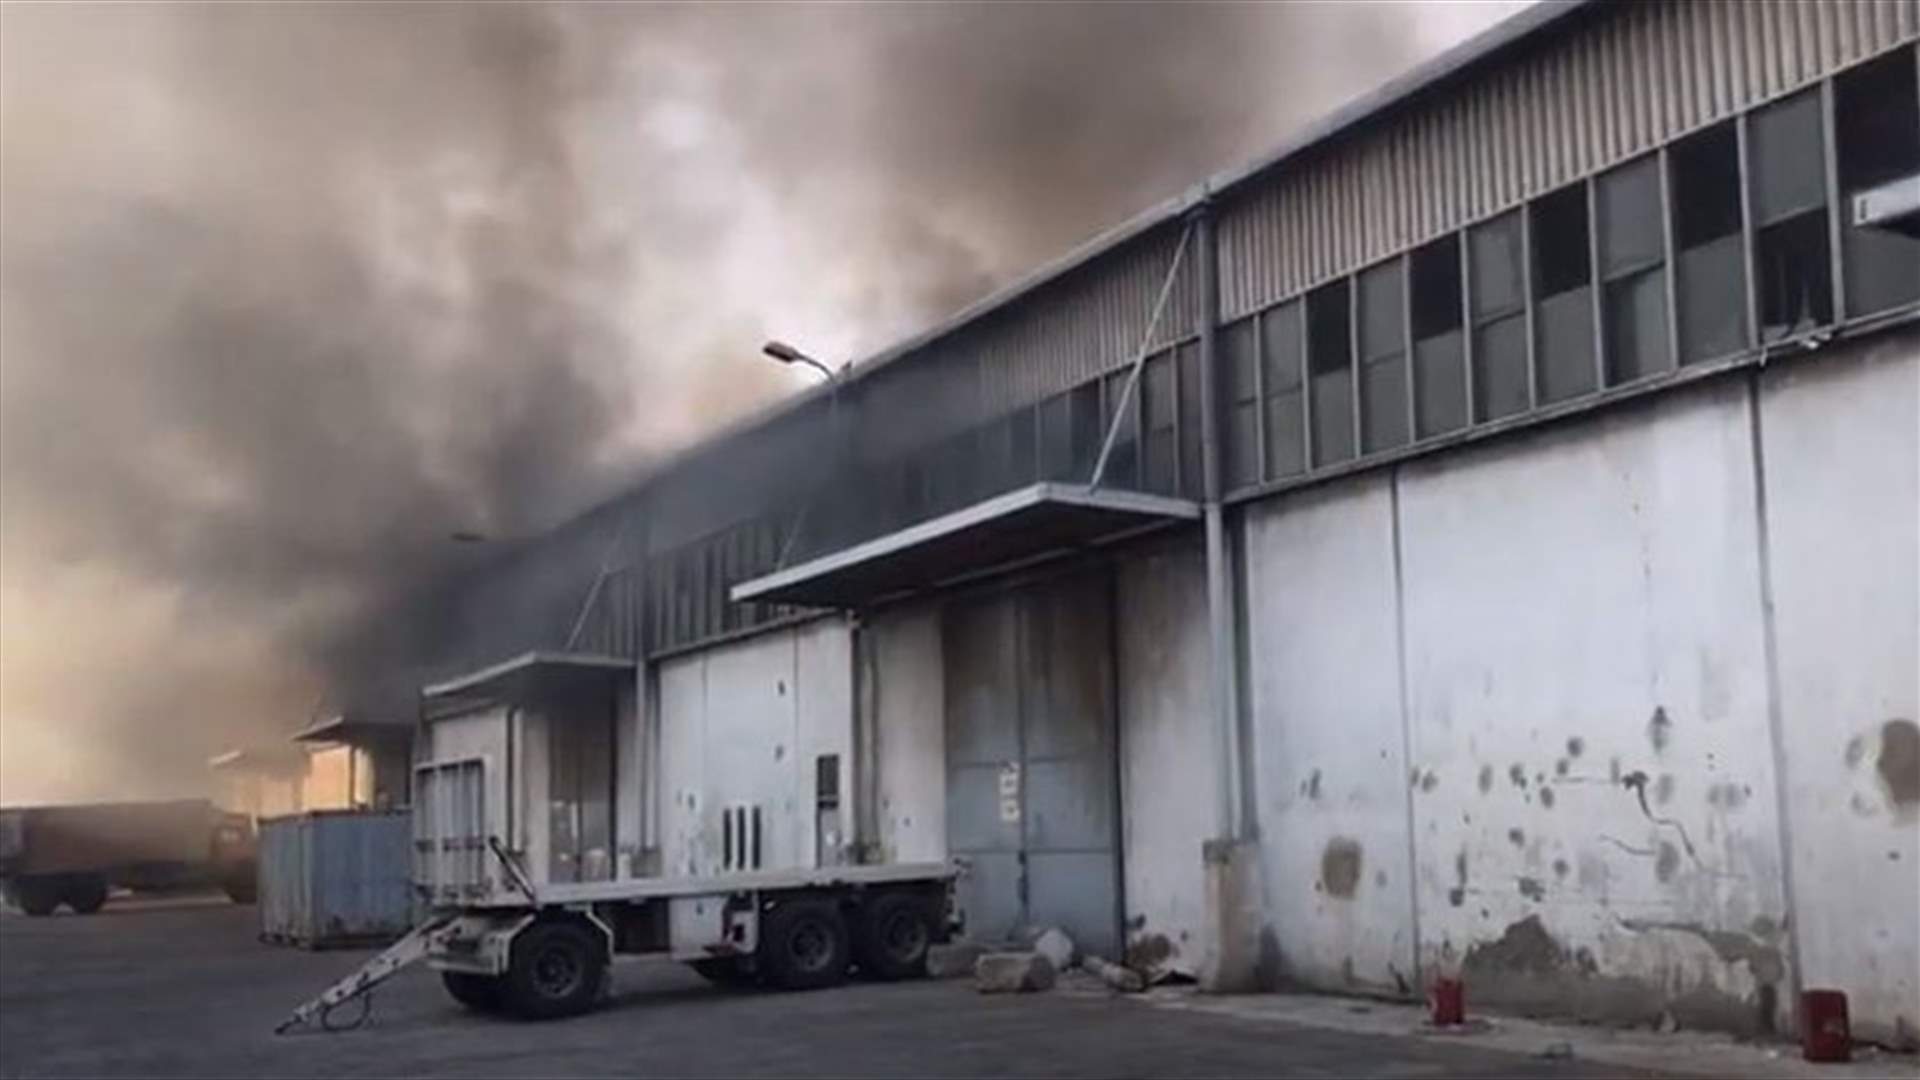 Video of fire in warehouse 12 before huge explosion-[VIDEO]